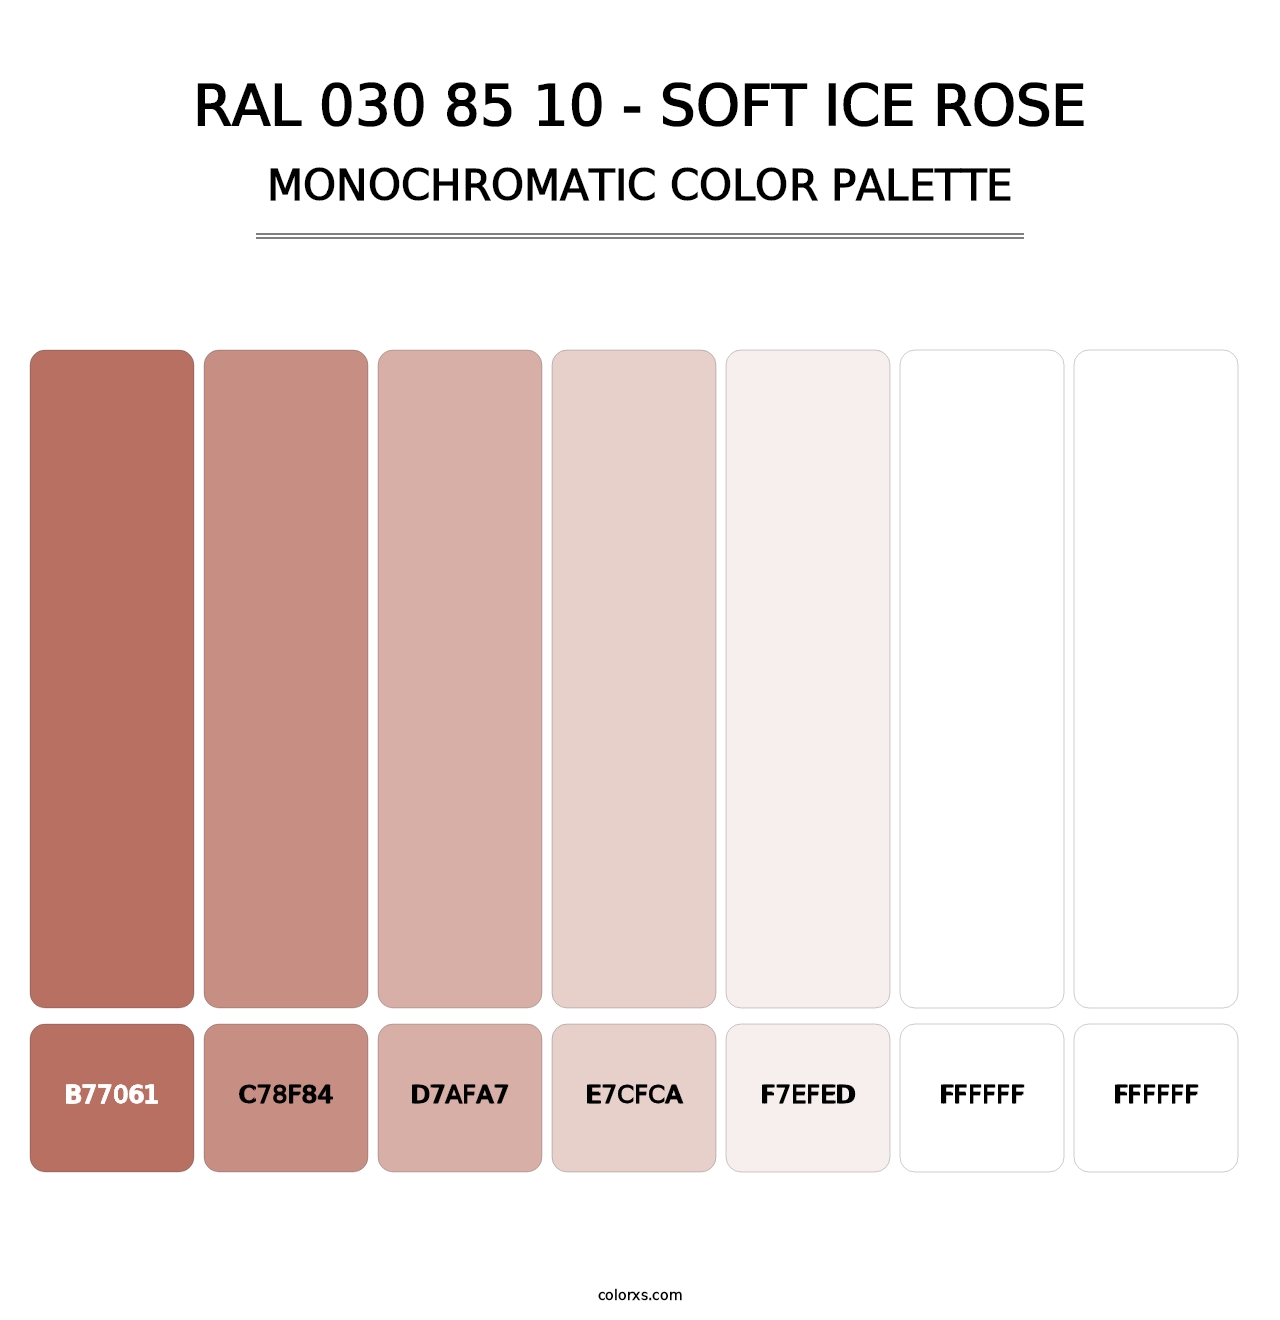 RAL 030 85 10 - Soft Ice Rose - Monochromatic Color Palette